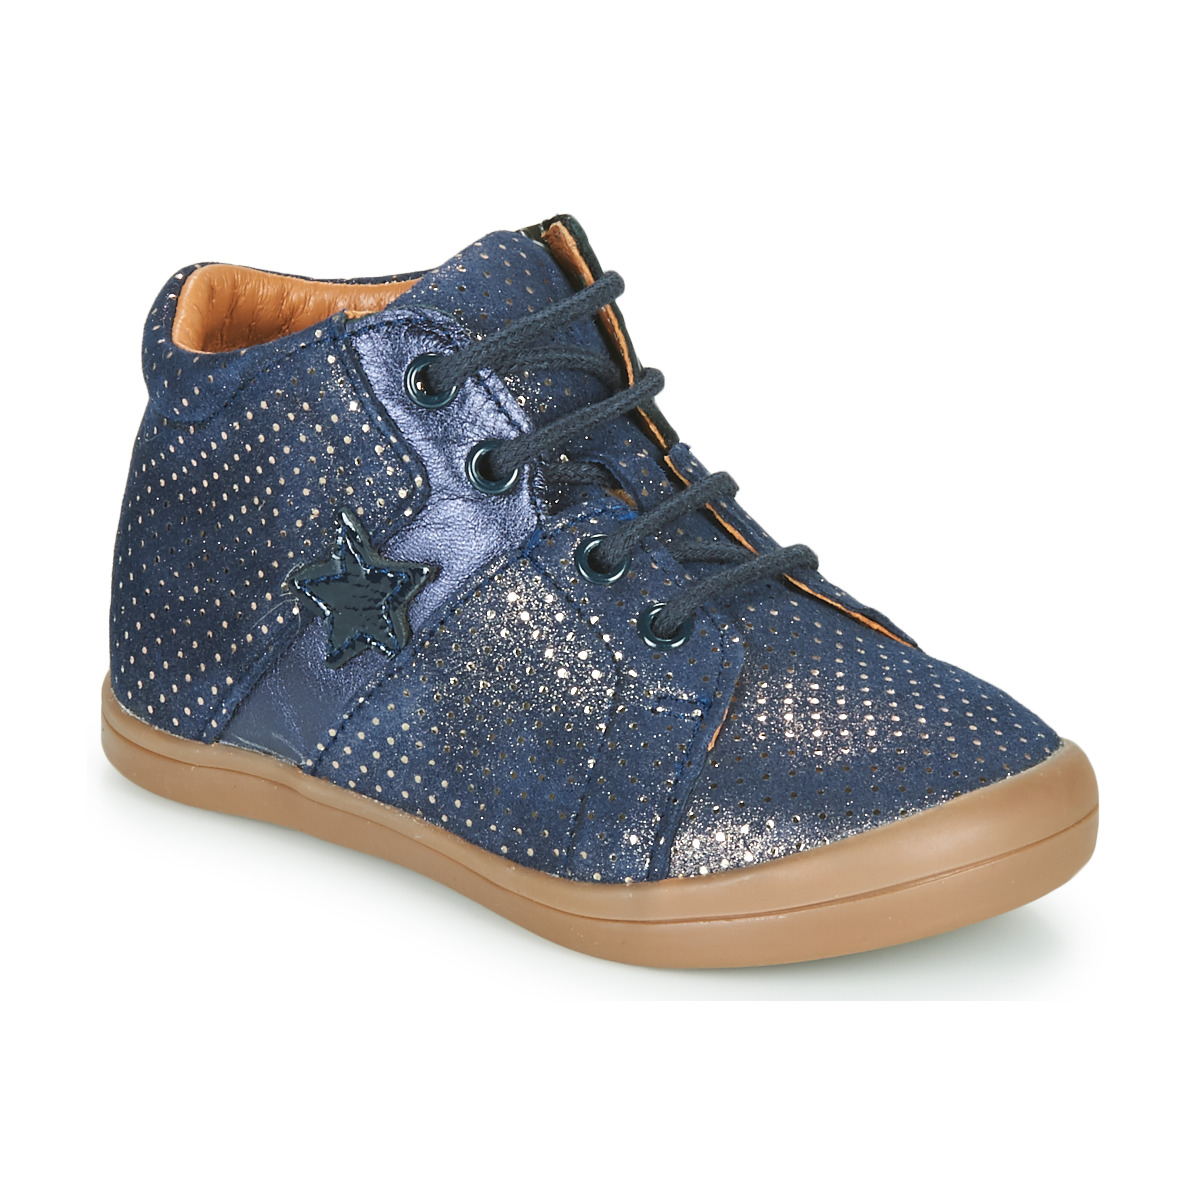 Shoes Girl Mid boots GBB DUANA Blue